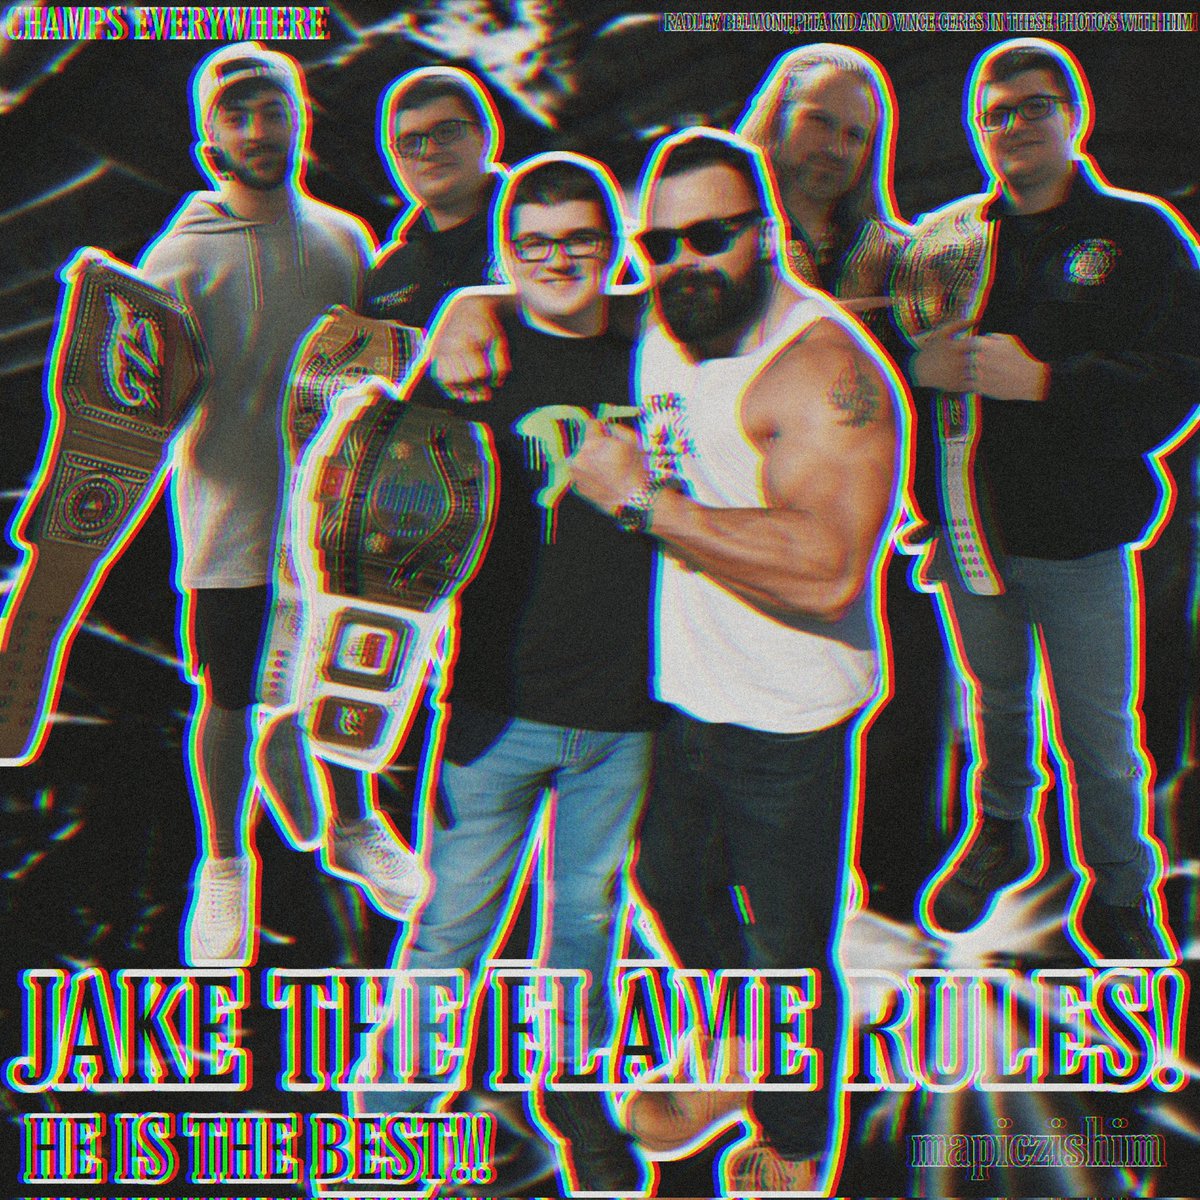 JAKE THE FLAMES RULES!!! 
WE SEE SO MANY CHAMPIONS! 
this was an old edit from a month ago but forgot to post! 
Hope yall love this!! 
@ChrisFicsor @vince_ceres @StepdadsWrestle @JakeTheFlame